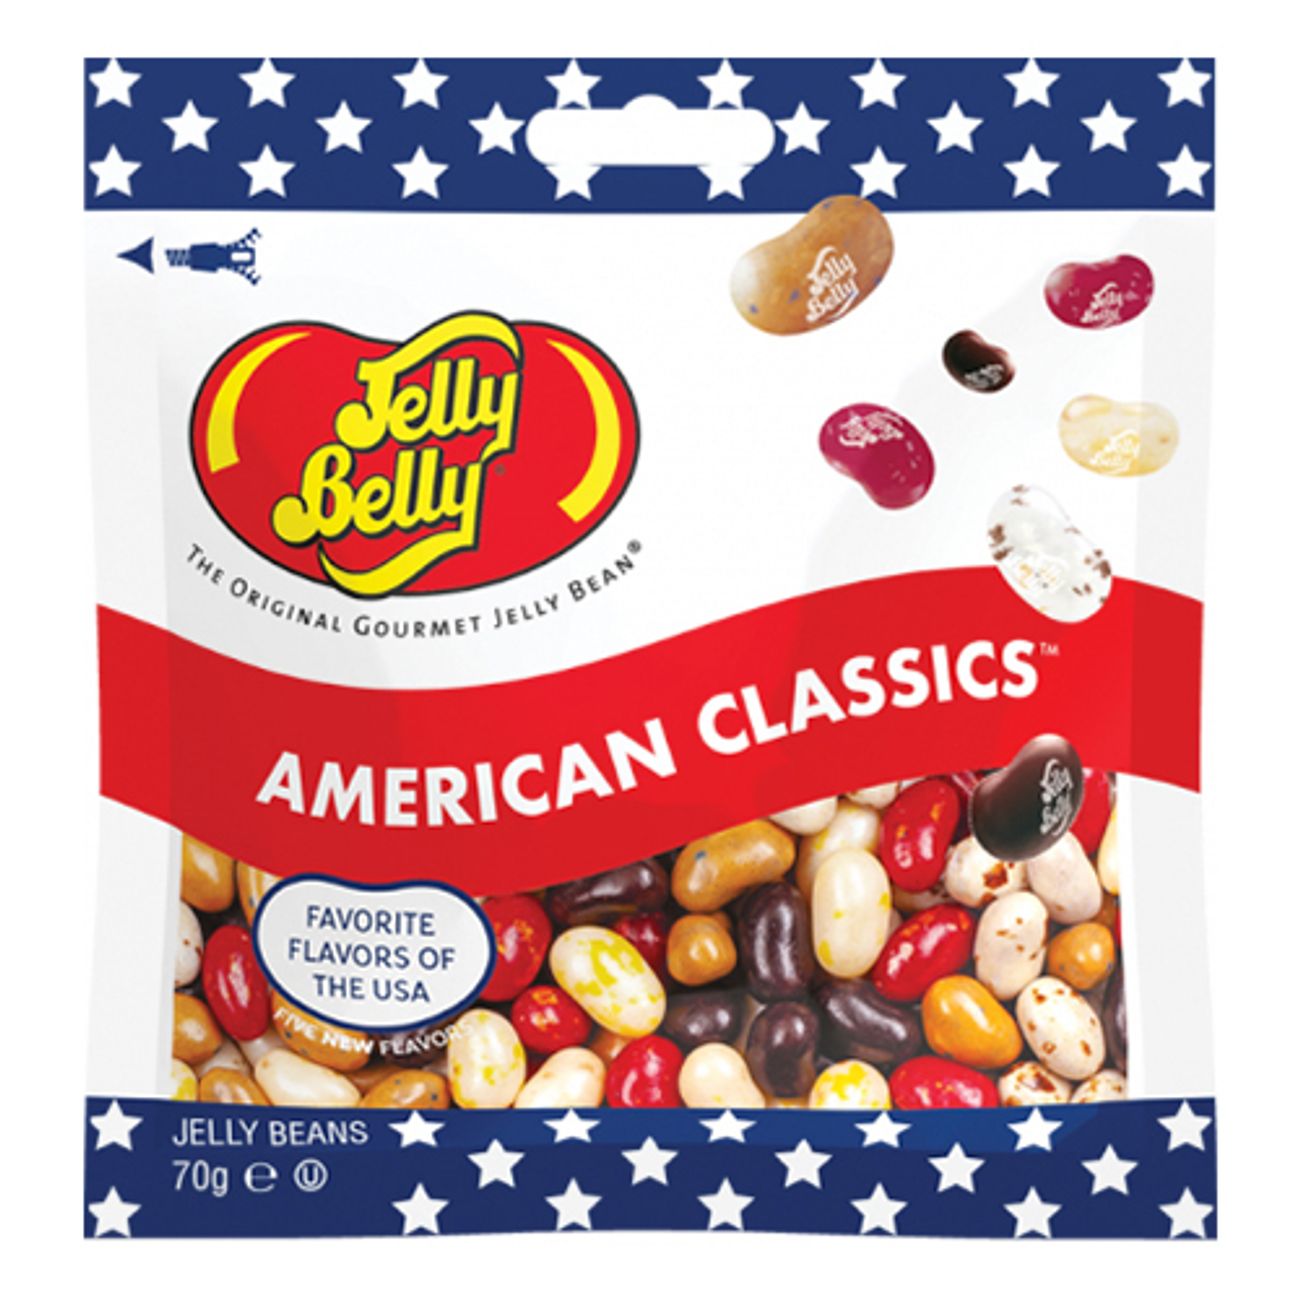 JellyBelly American Classics Partykungen